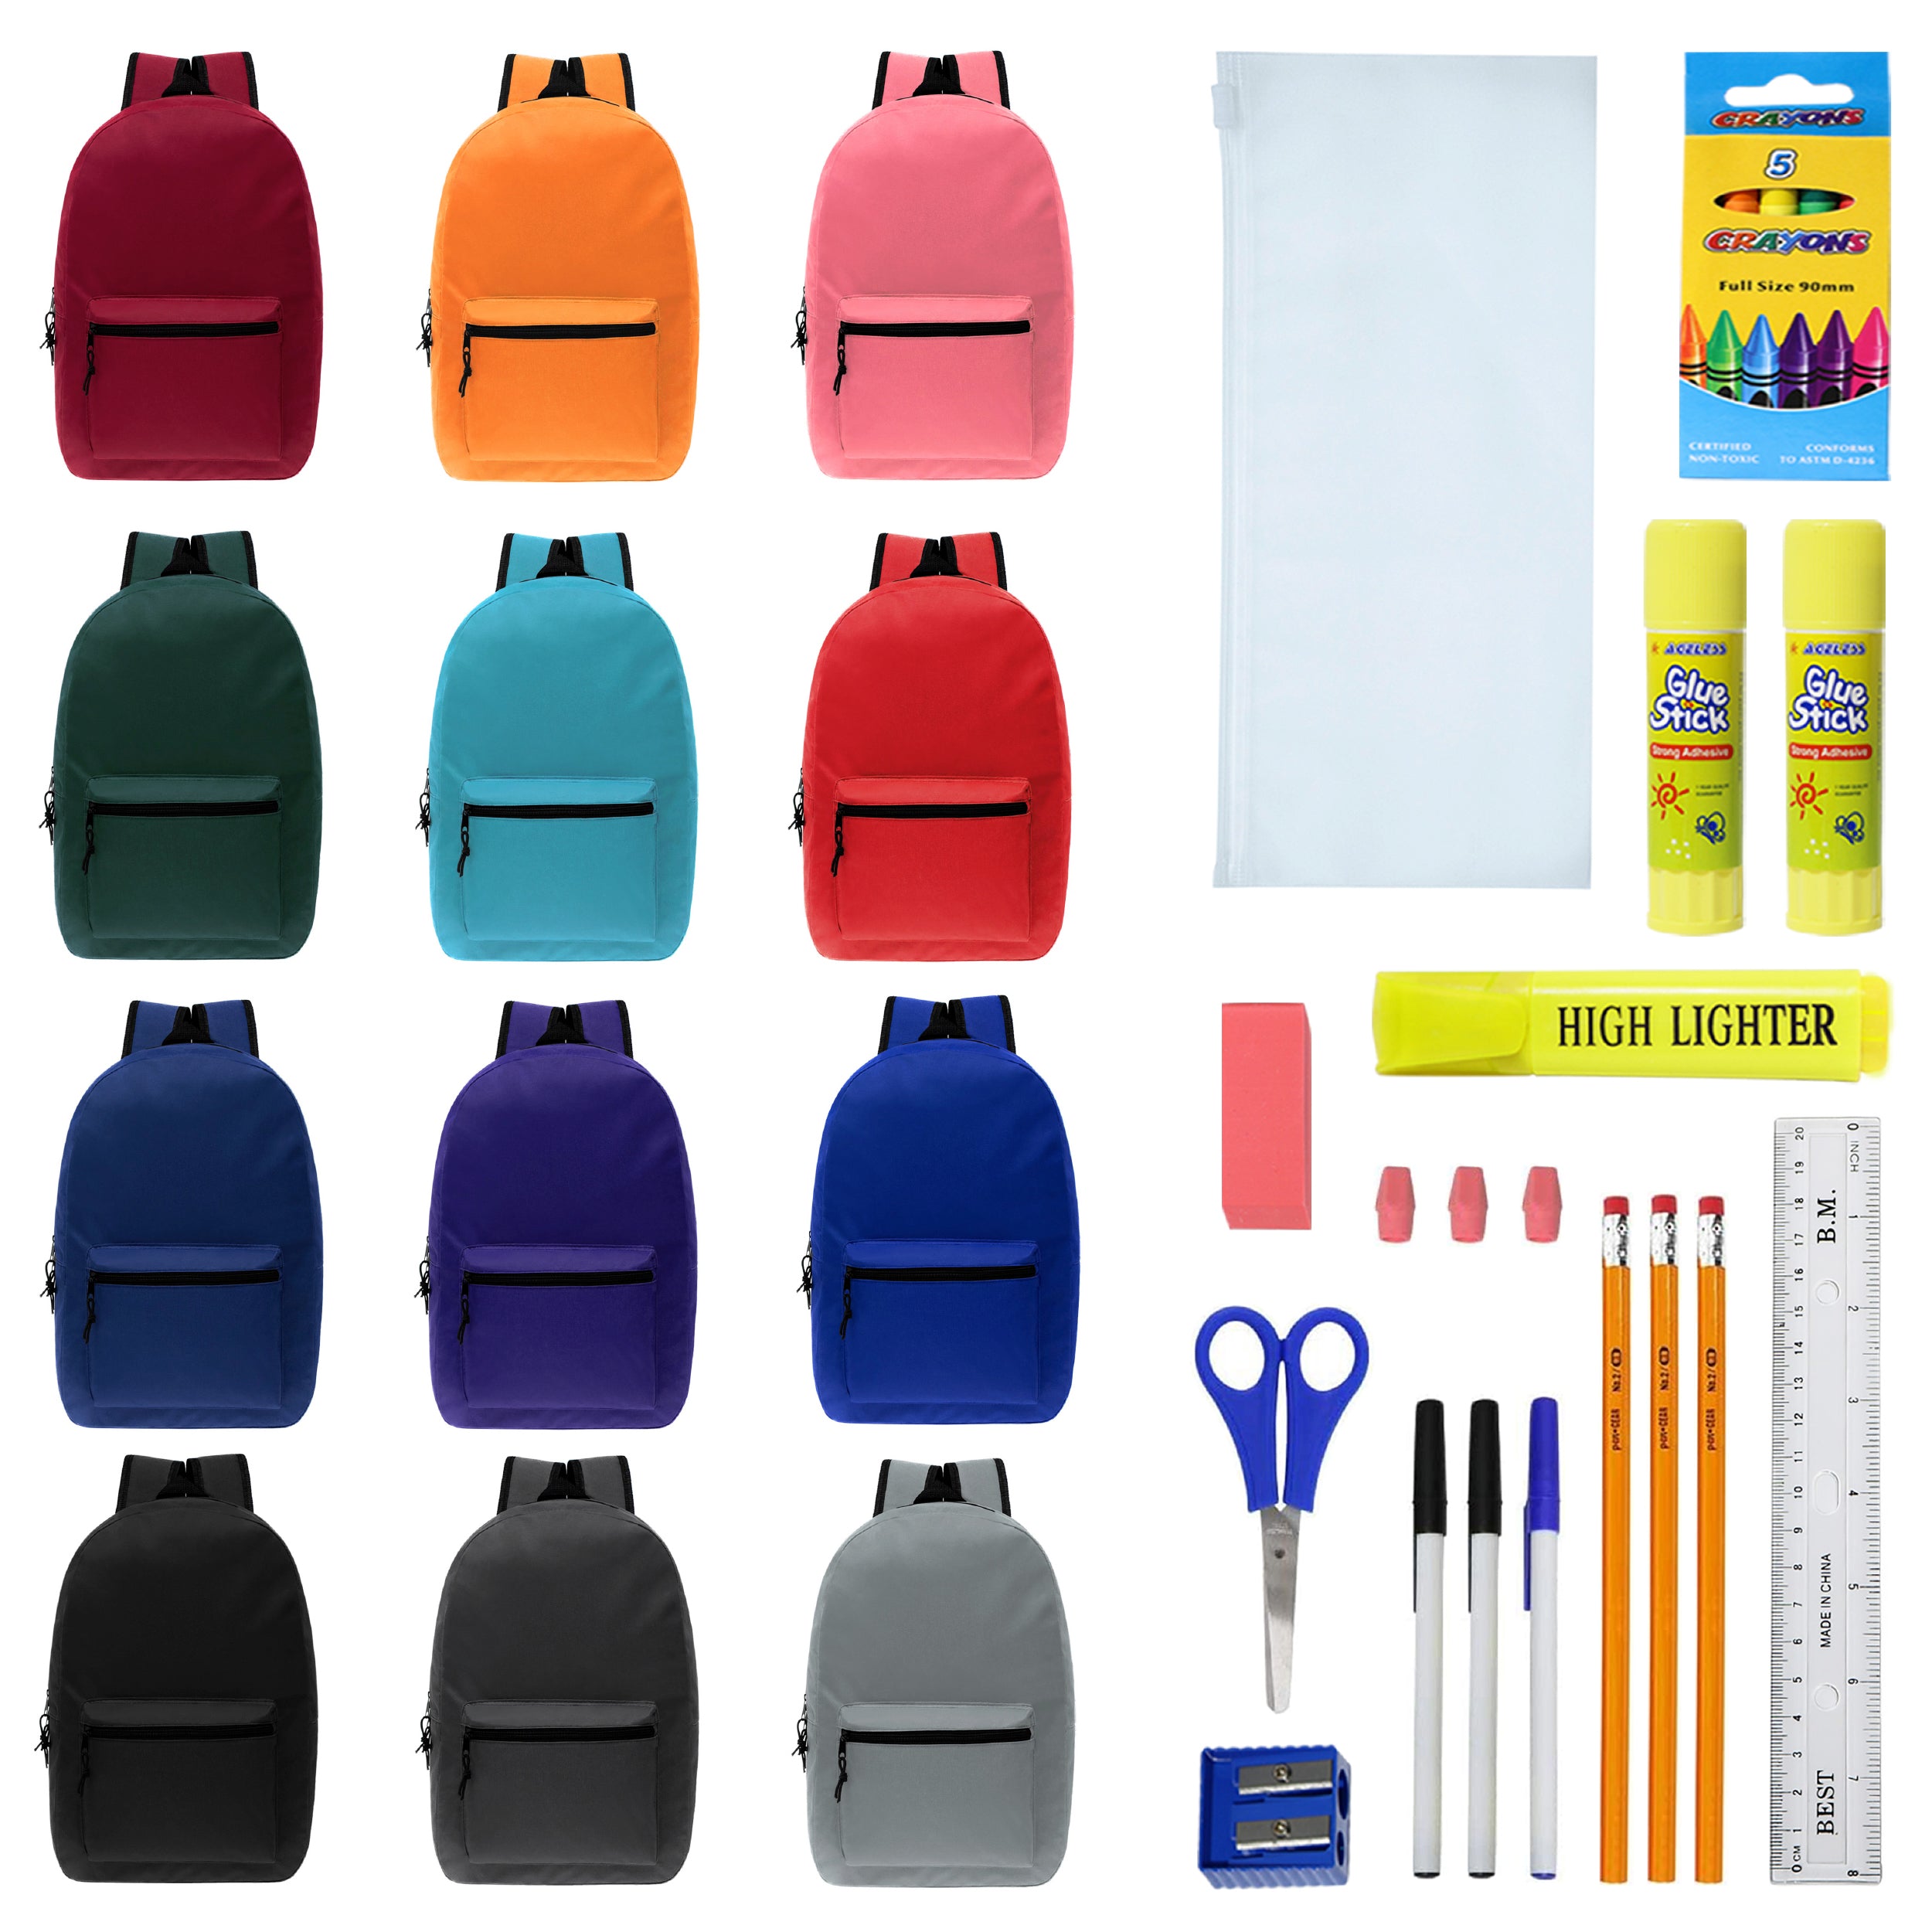 17 inches School Backpacks for Kids In Assorted Colors Bulk School Supplies Kit Case Of 12